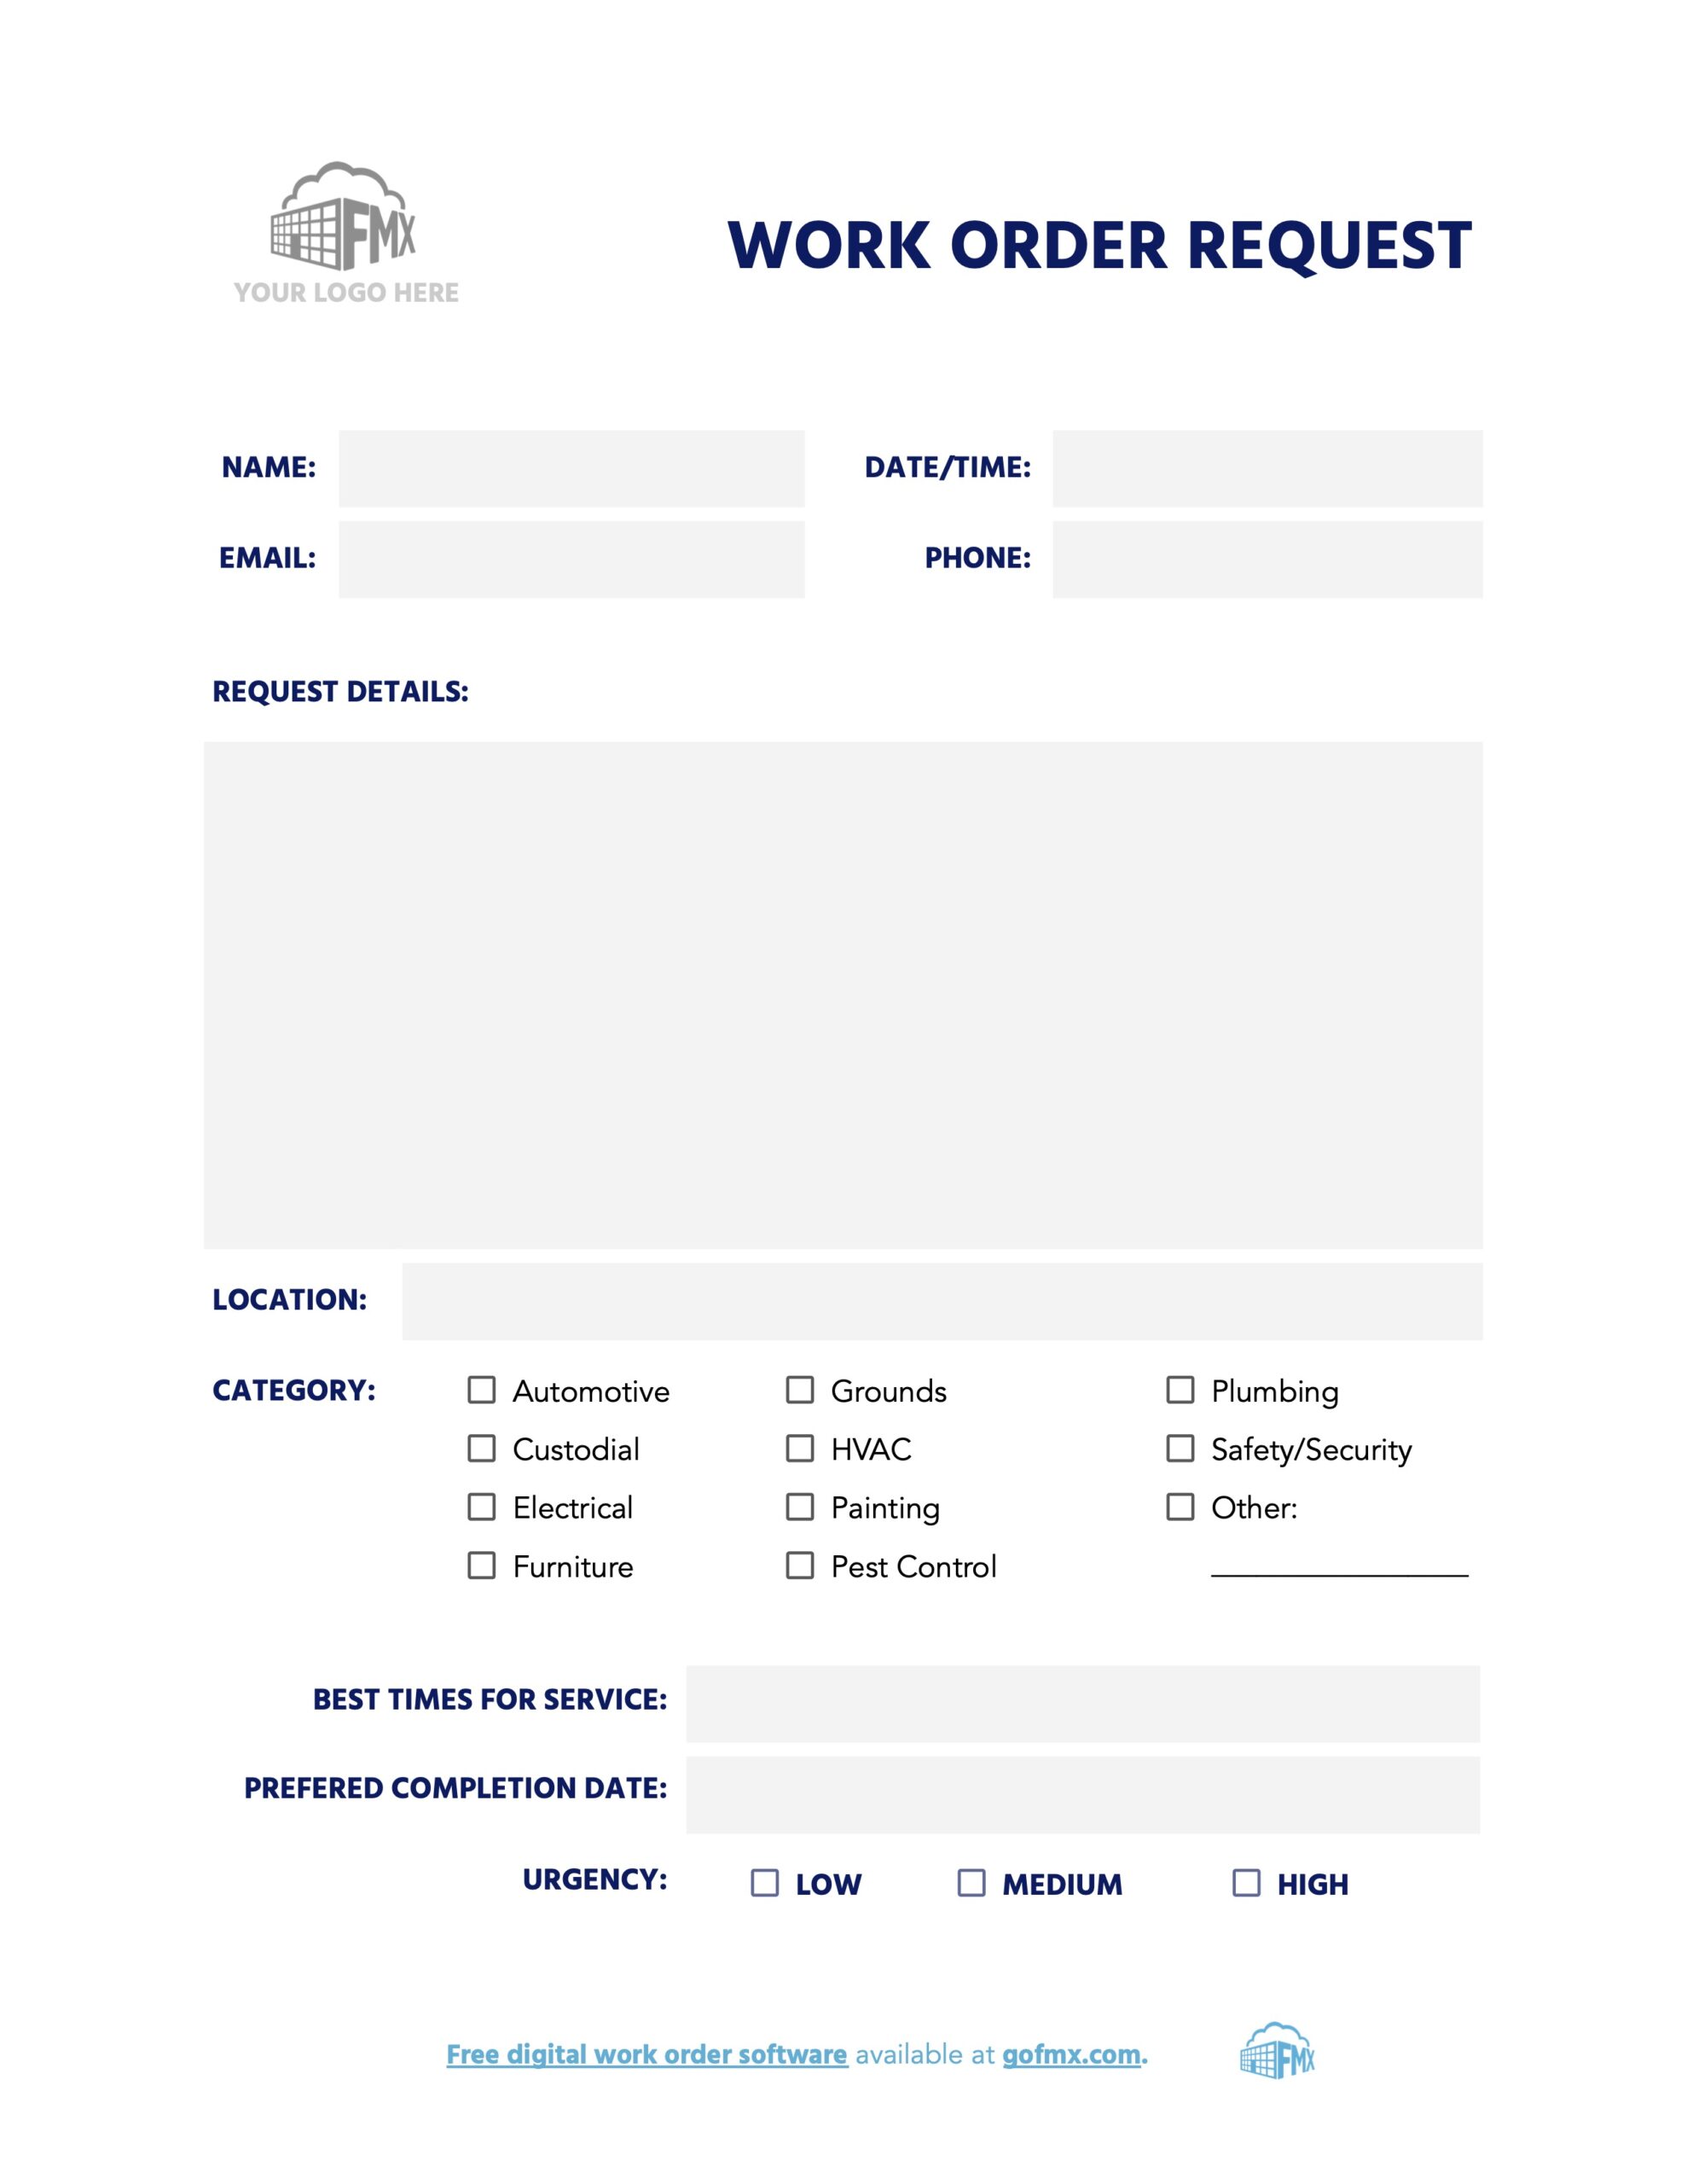 A sample work order request template includes fields for name, date, email, phone, request details, location, category, the best time for service, due date, and urgency.